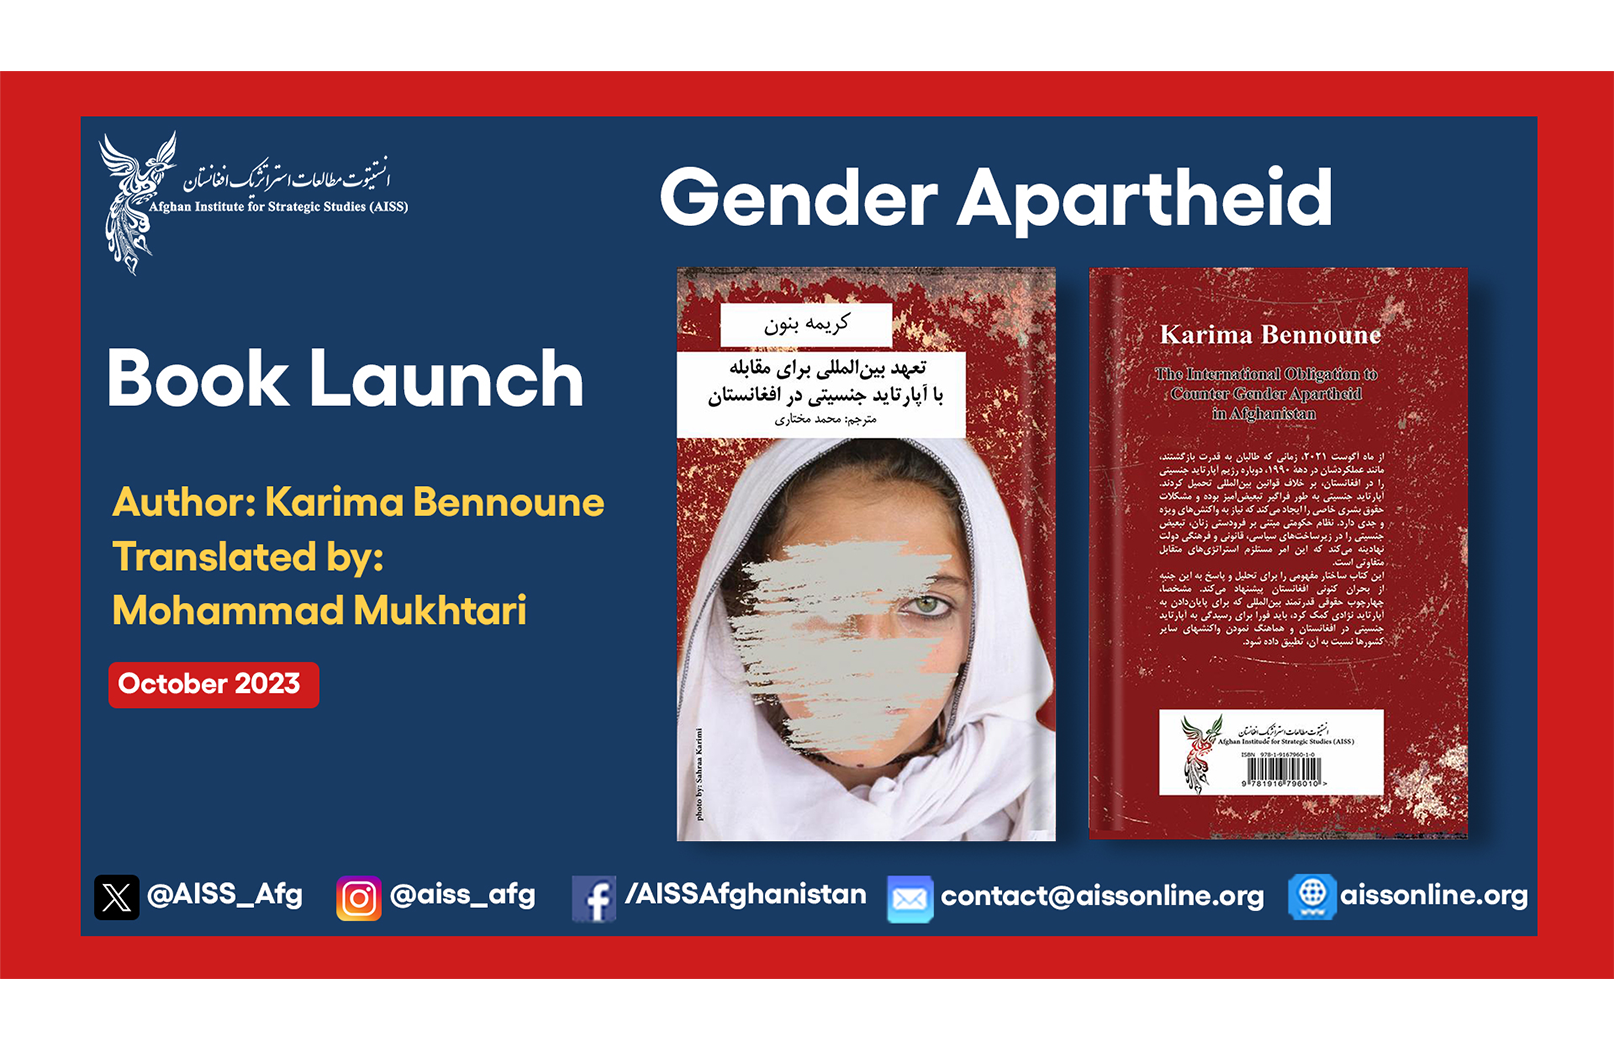 <p><strong>Translation of the Book&nbsp;on &ldquo;Gender Apartheid in Afghanistan&rdquo;</strong></p>